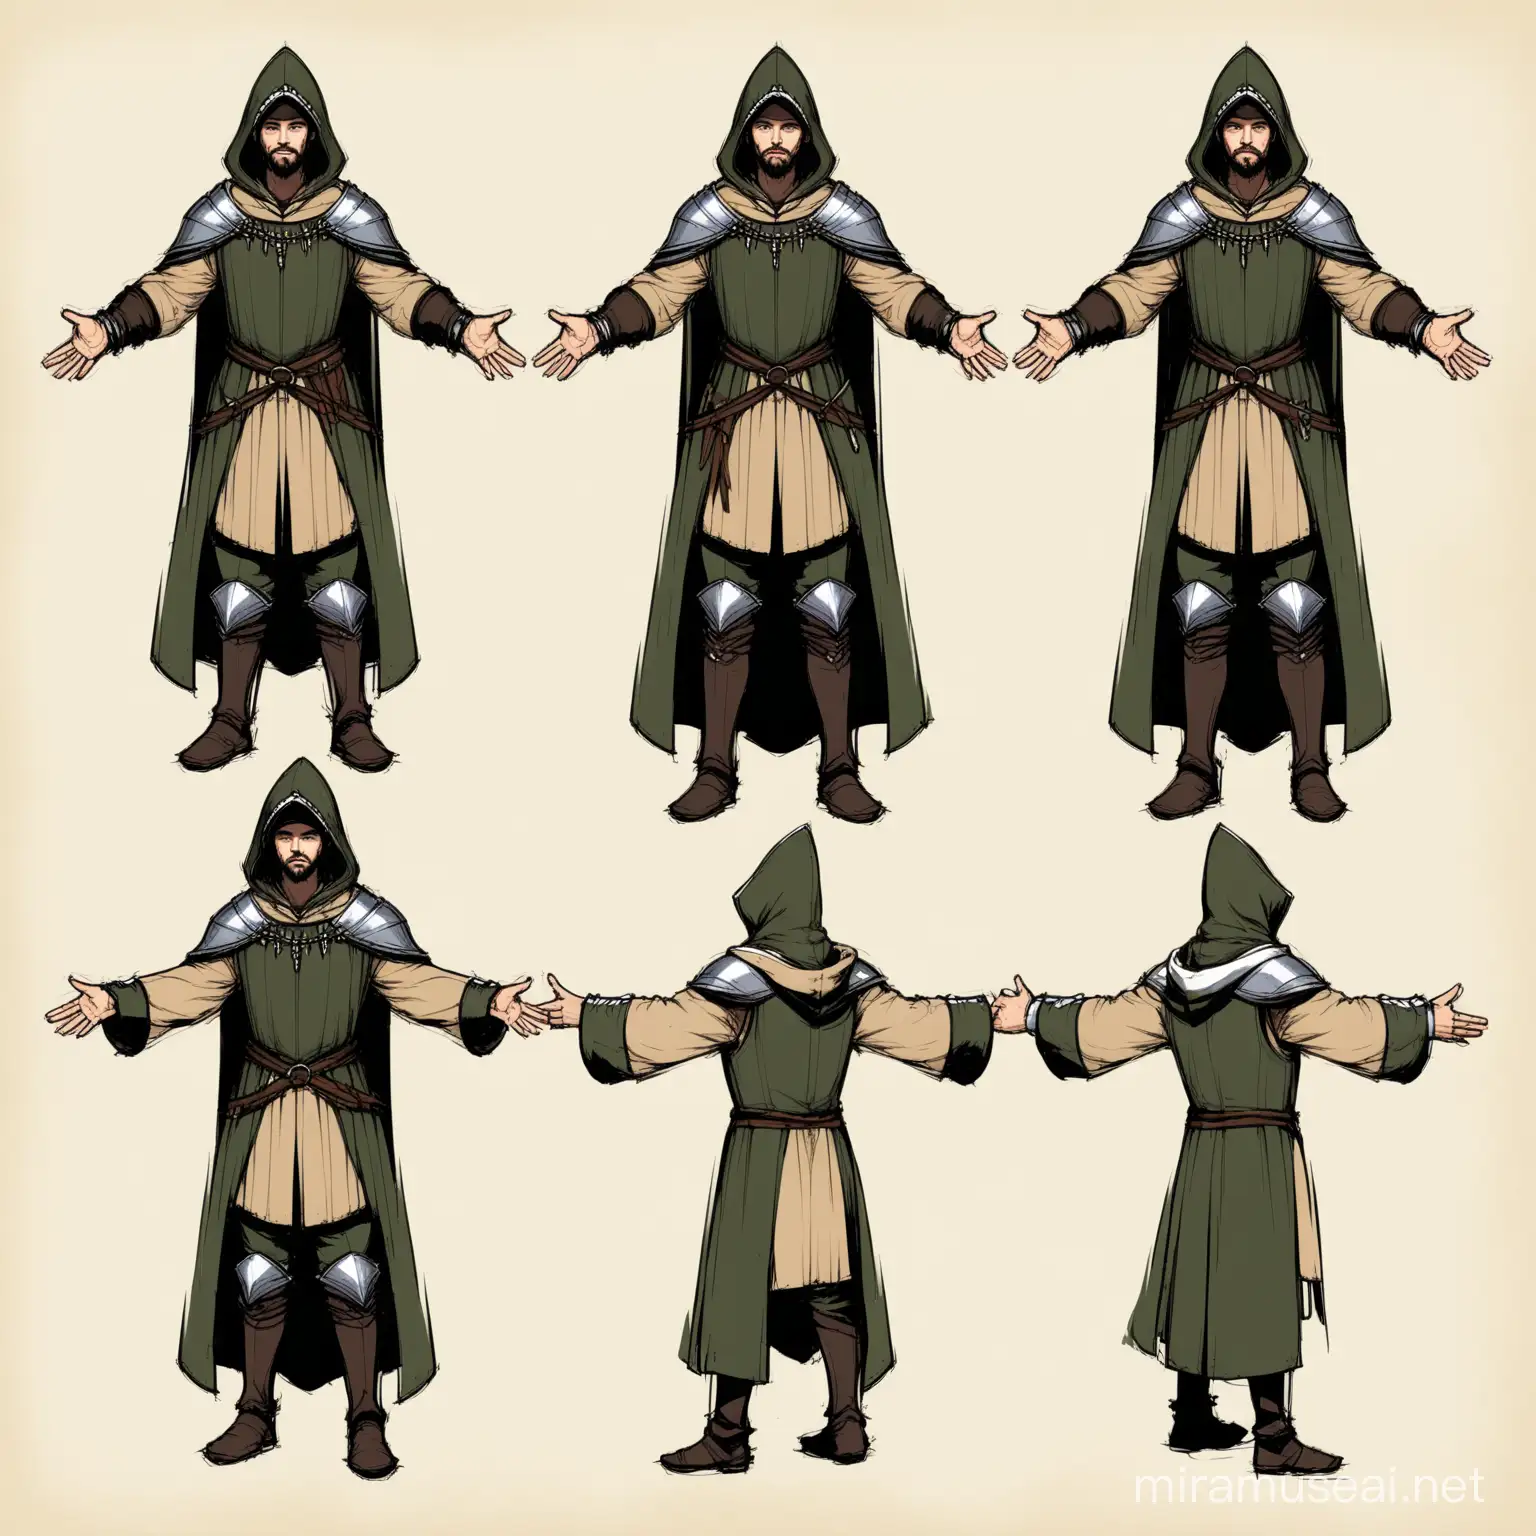 wardrobe concept art, medieval male outfit, deep hood arms out, hands open
